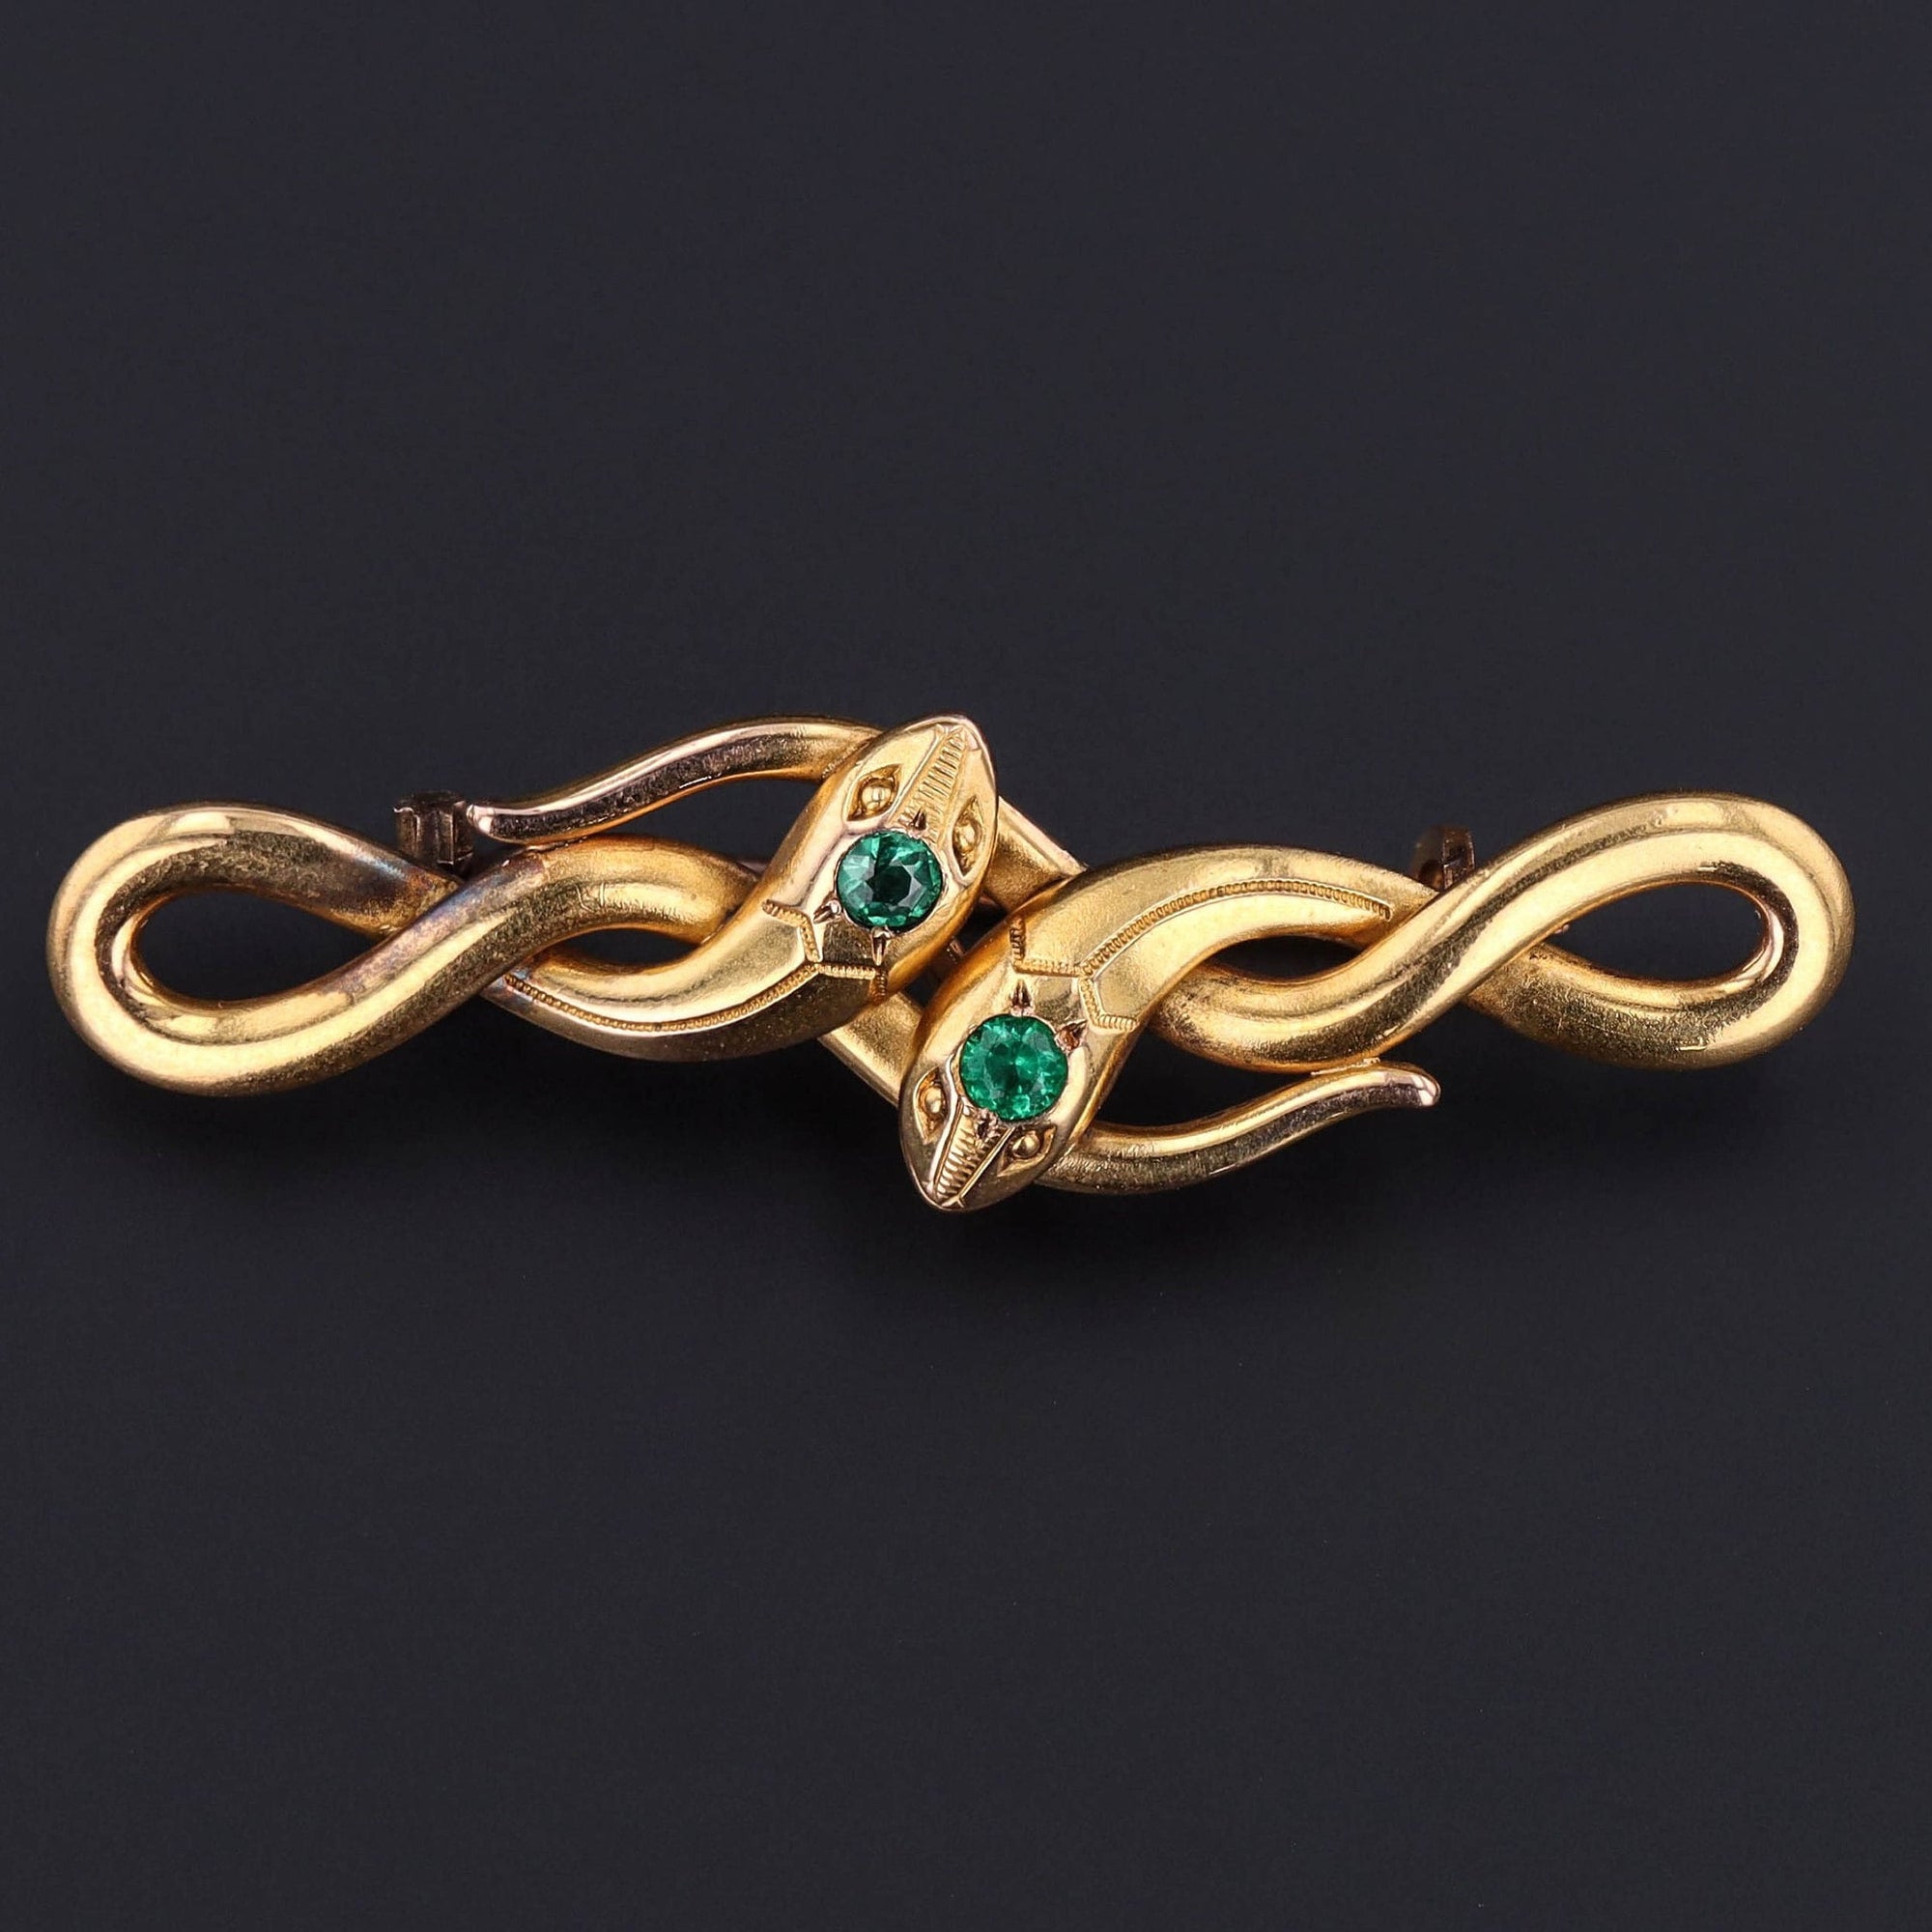 Antique Double Snake Brooch or Pendant  | Gold Fix Brooch 